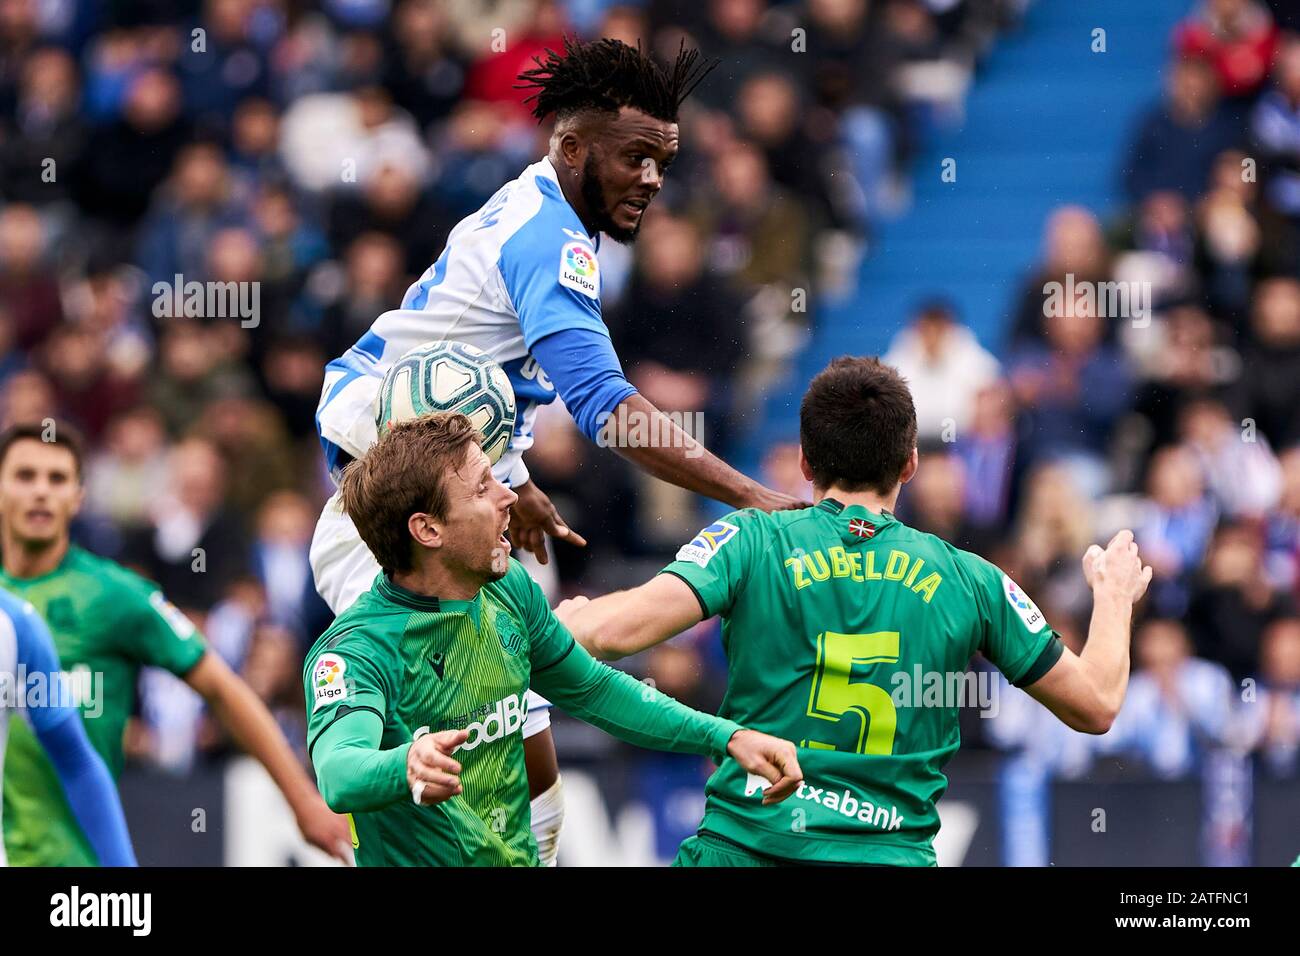 Chidozie Collins Awaziem of CD Leganes and Nacho Monreal of Real Sociedad are seen in action during the La Liga football match between CD Leganes and Real Sociedad at Butarque Stadium in Leganes.(Final score; CD Leganes 2:1Real Sociedad) Stock Photo